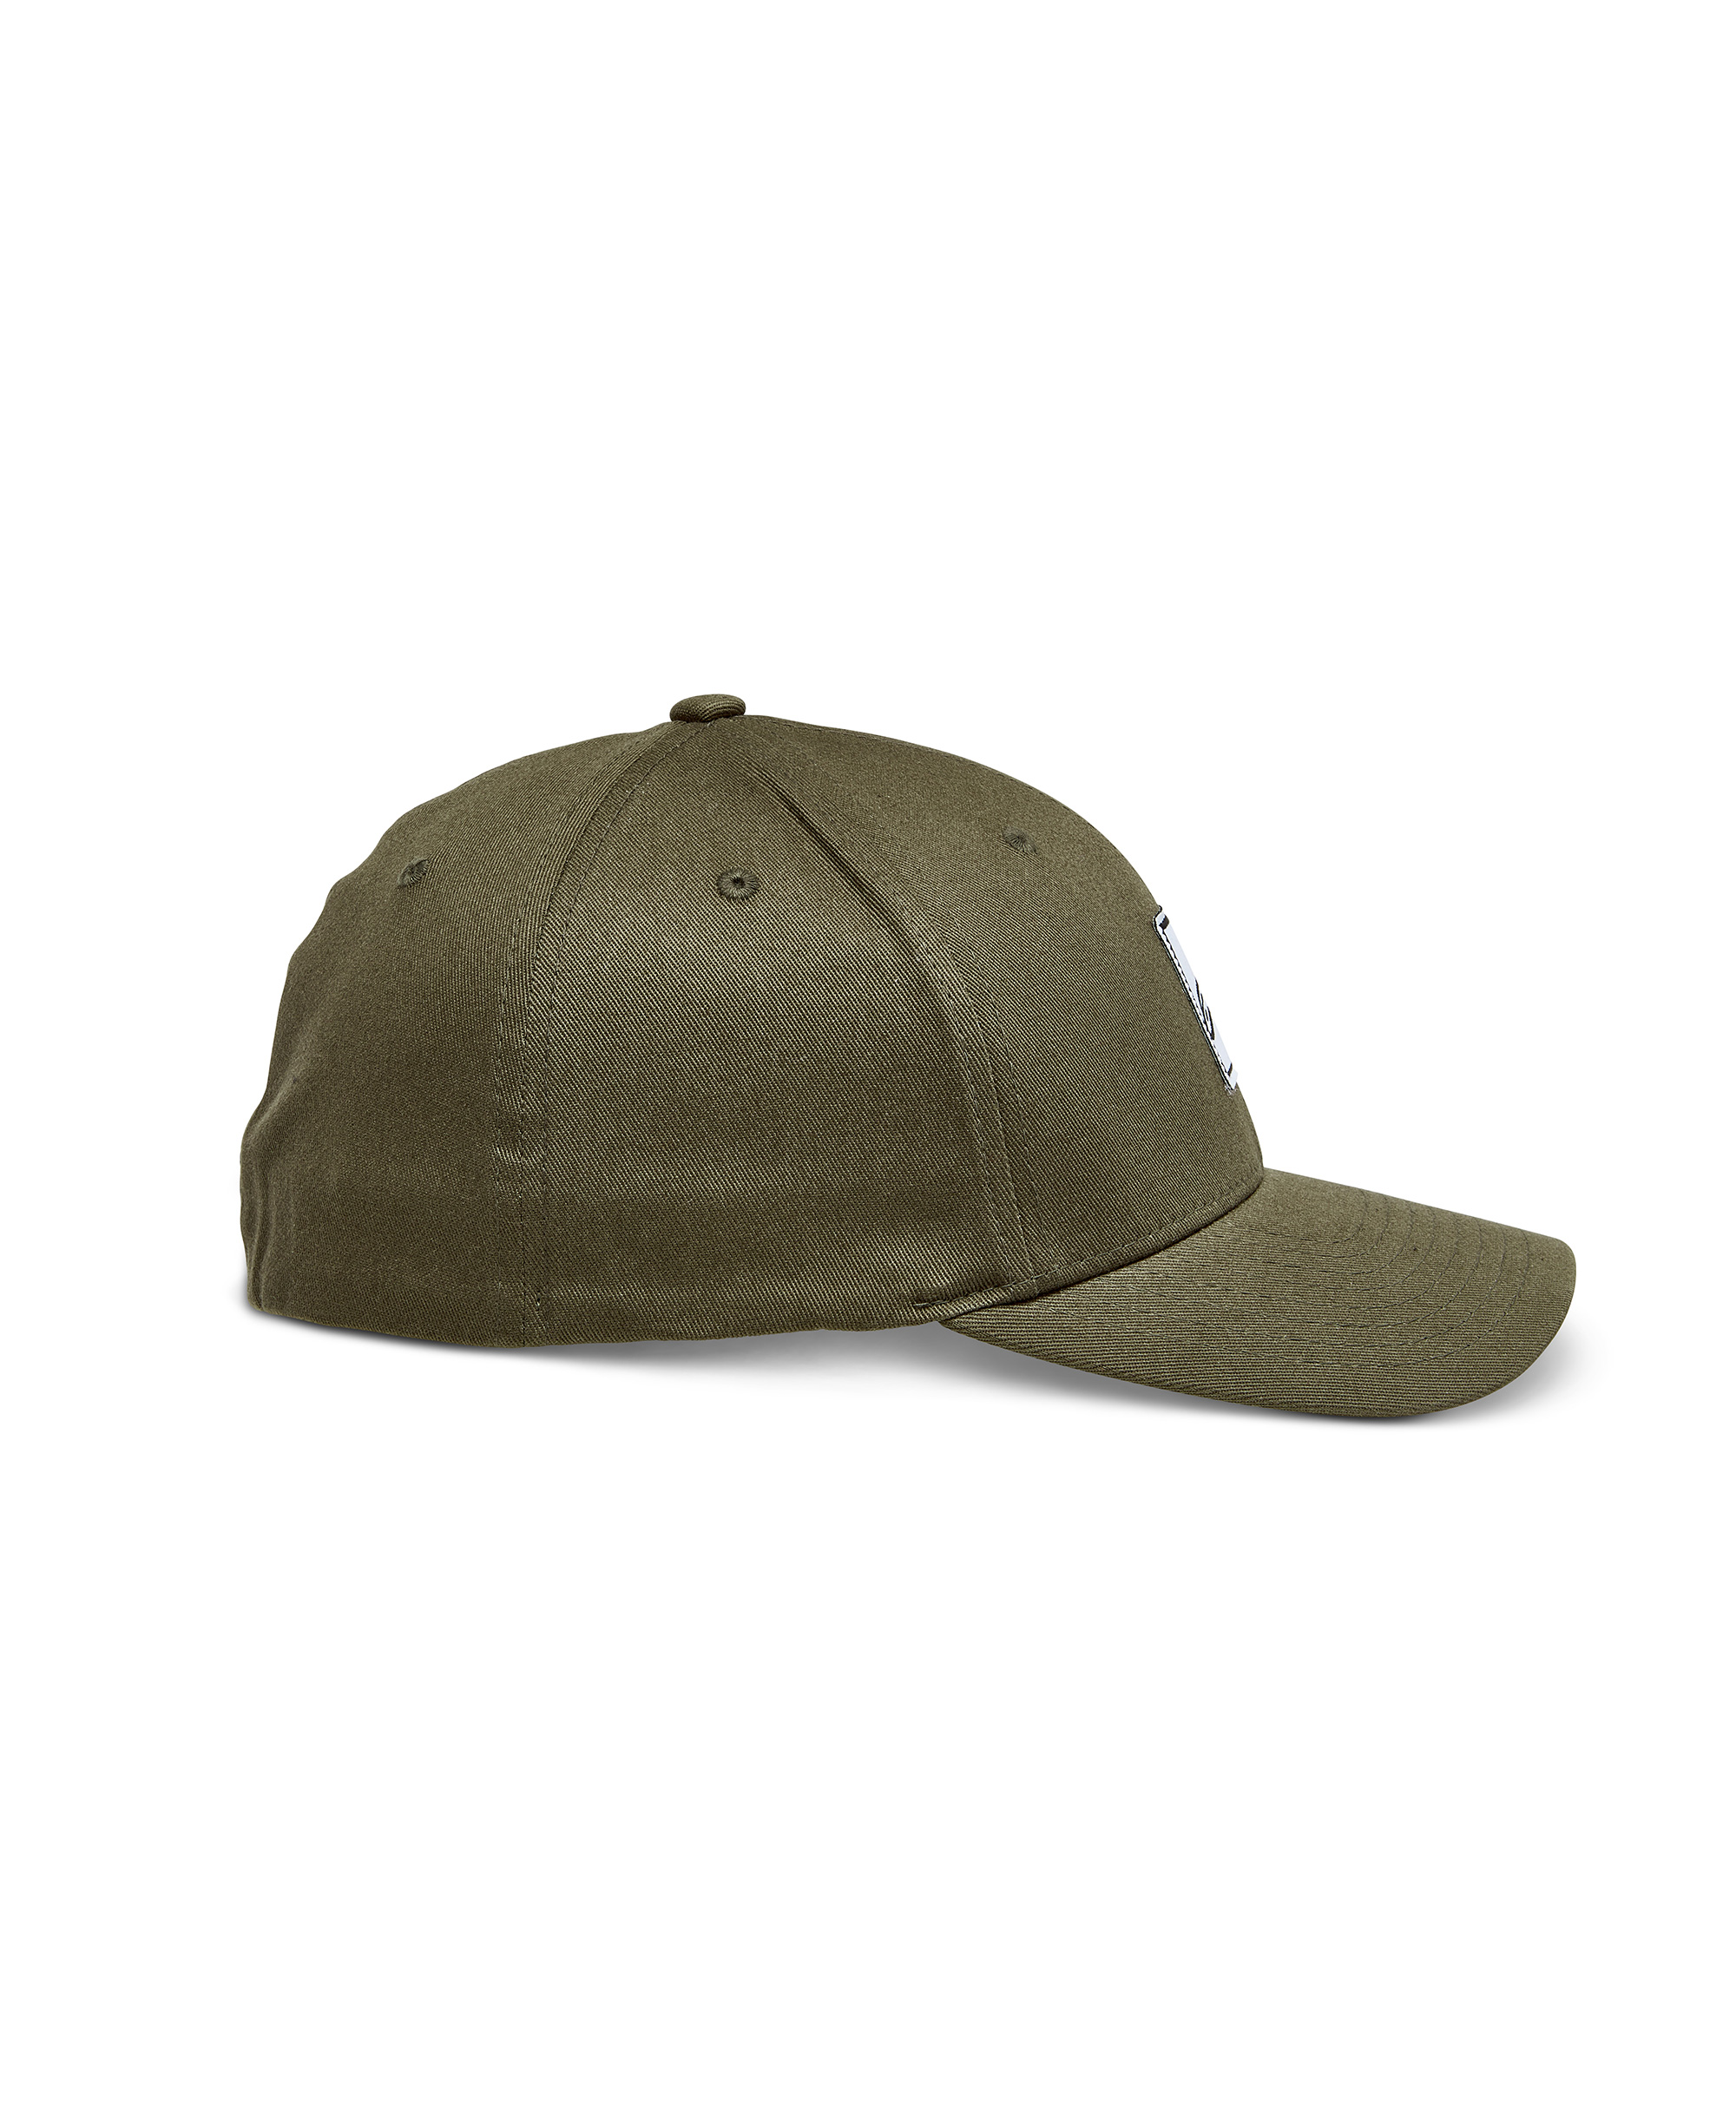 MEDDLE HAT MILITARY GREEN